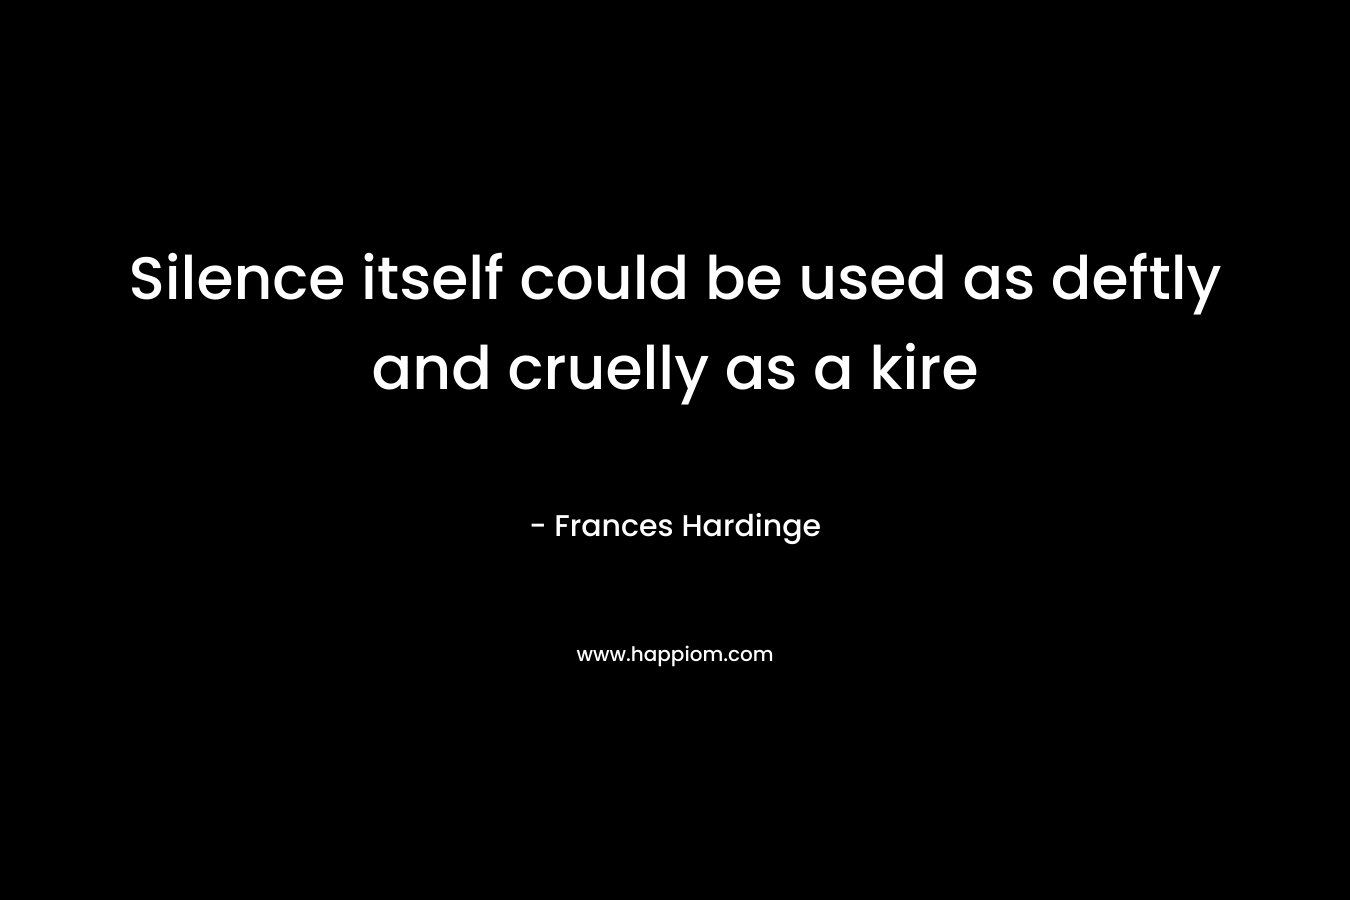 Silence itself could be used as deftly and cruelly as a kire – Frances Hardinge